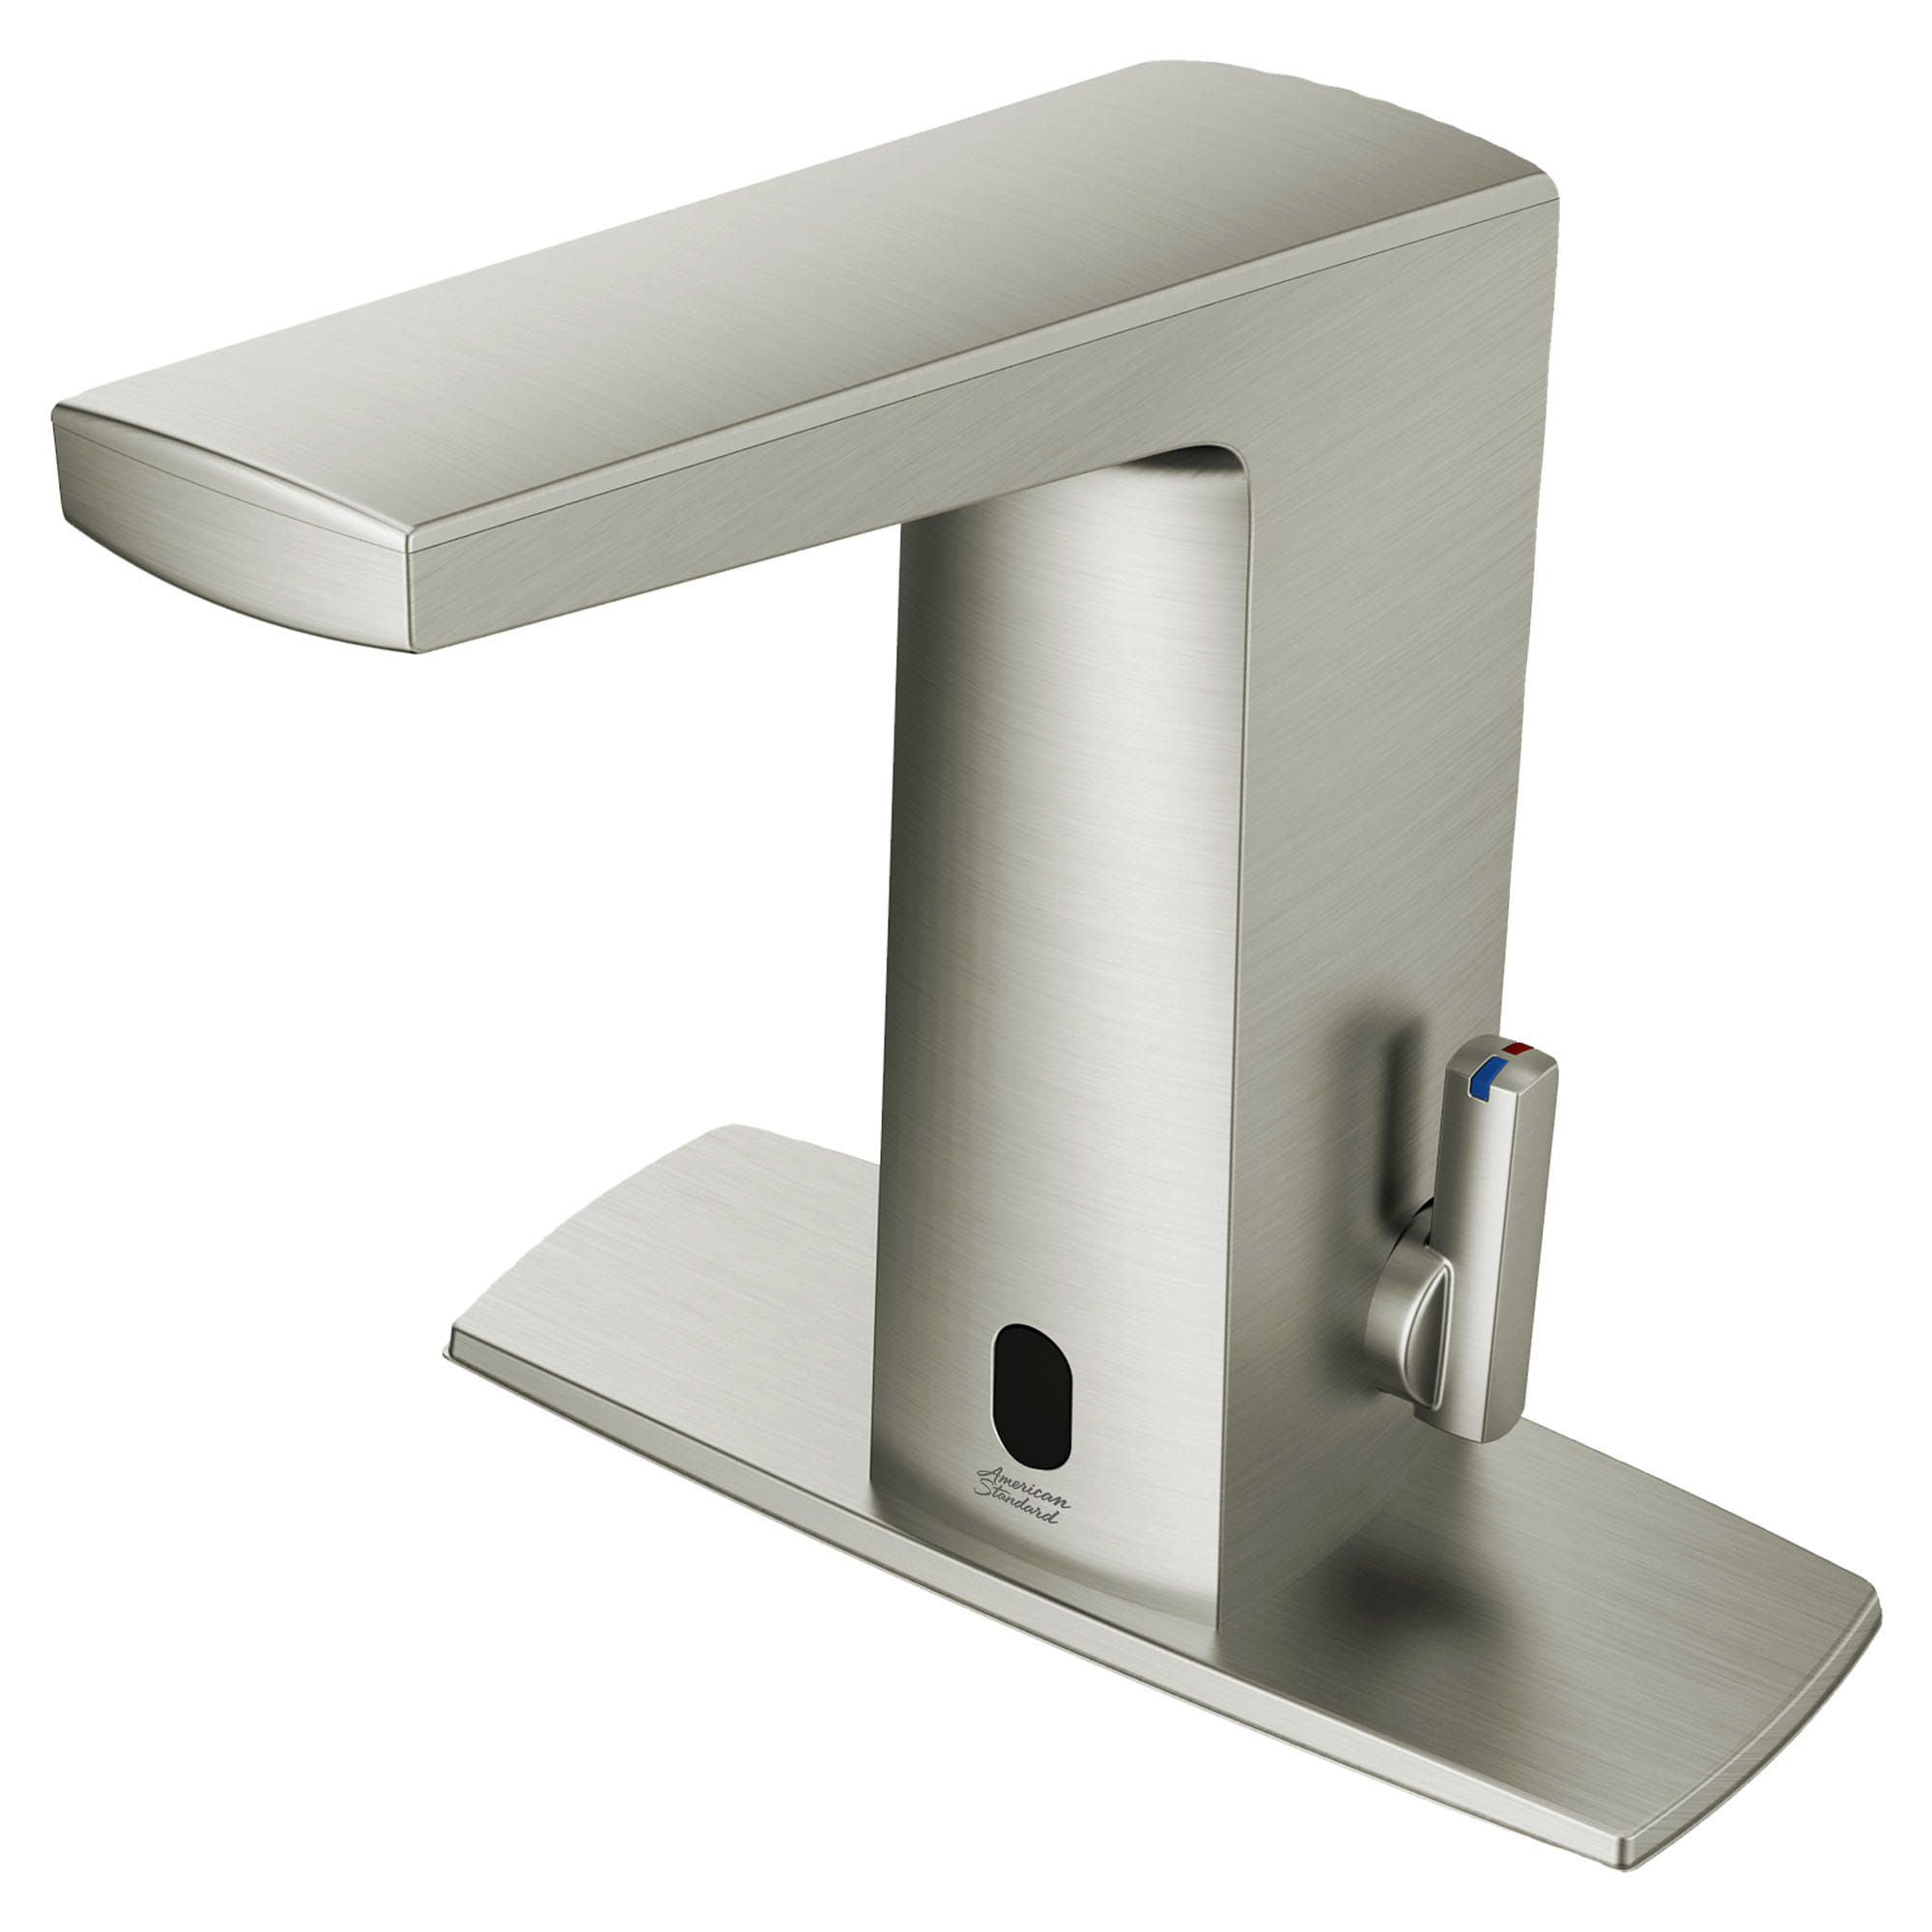 Paradigm® Selectronic® Touchless Faucet, Battery-Powered With SmarTherm Safety Shut-Off + ADM, 1.5 gpm/5.7 Lpm